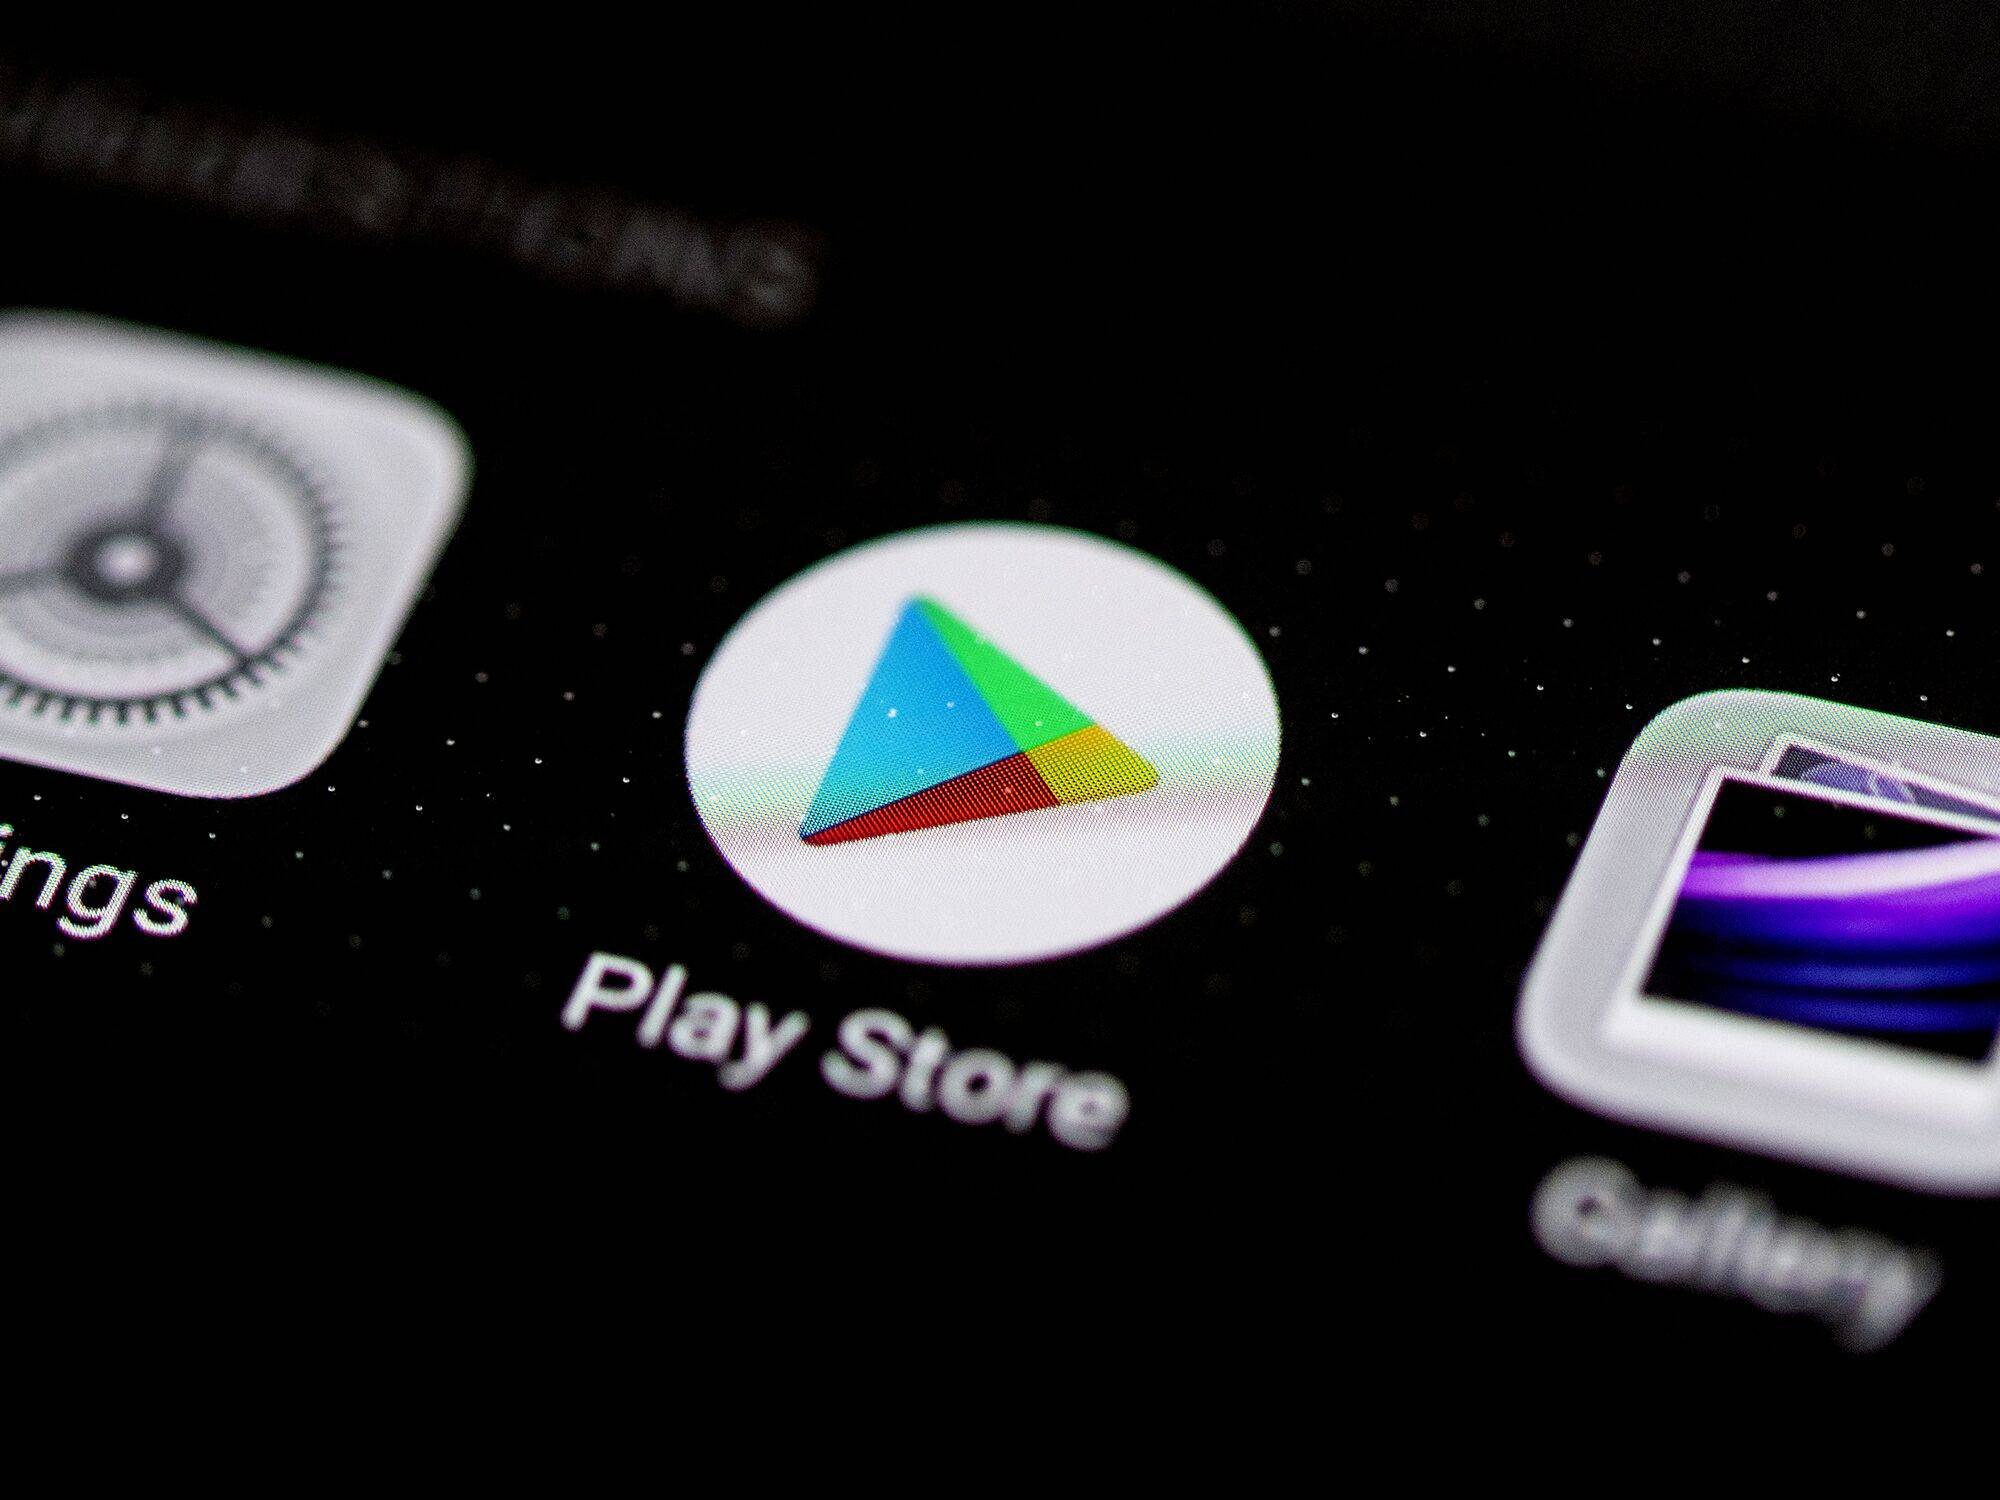 Android Apps on Google Play